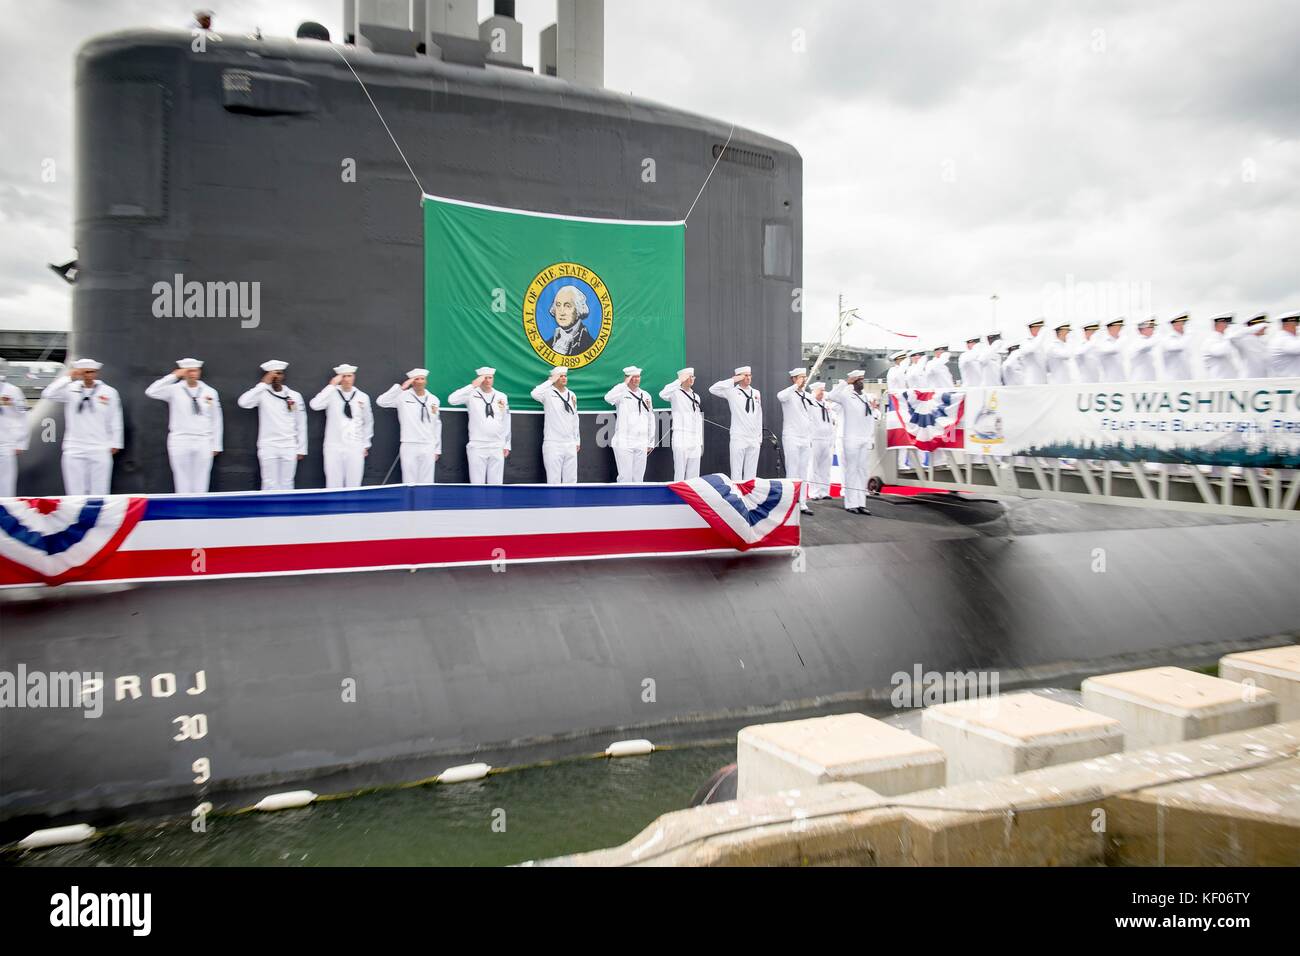 U.S. Navy sailors render honors aboard the U.S. Navy Virginia-class fast-attack submarine USS Washington during its commissioning ceremony at the Naval Station Norfolk October 7, 2017 in Norfolk, Virginia. Stock Photo